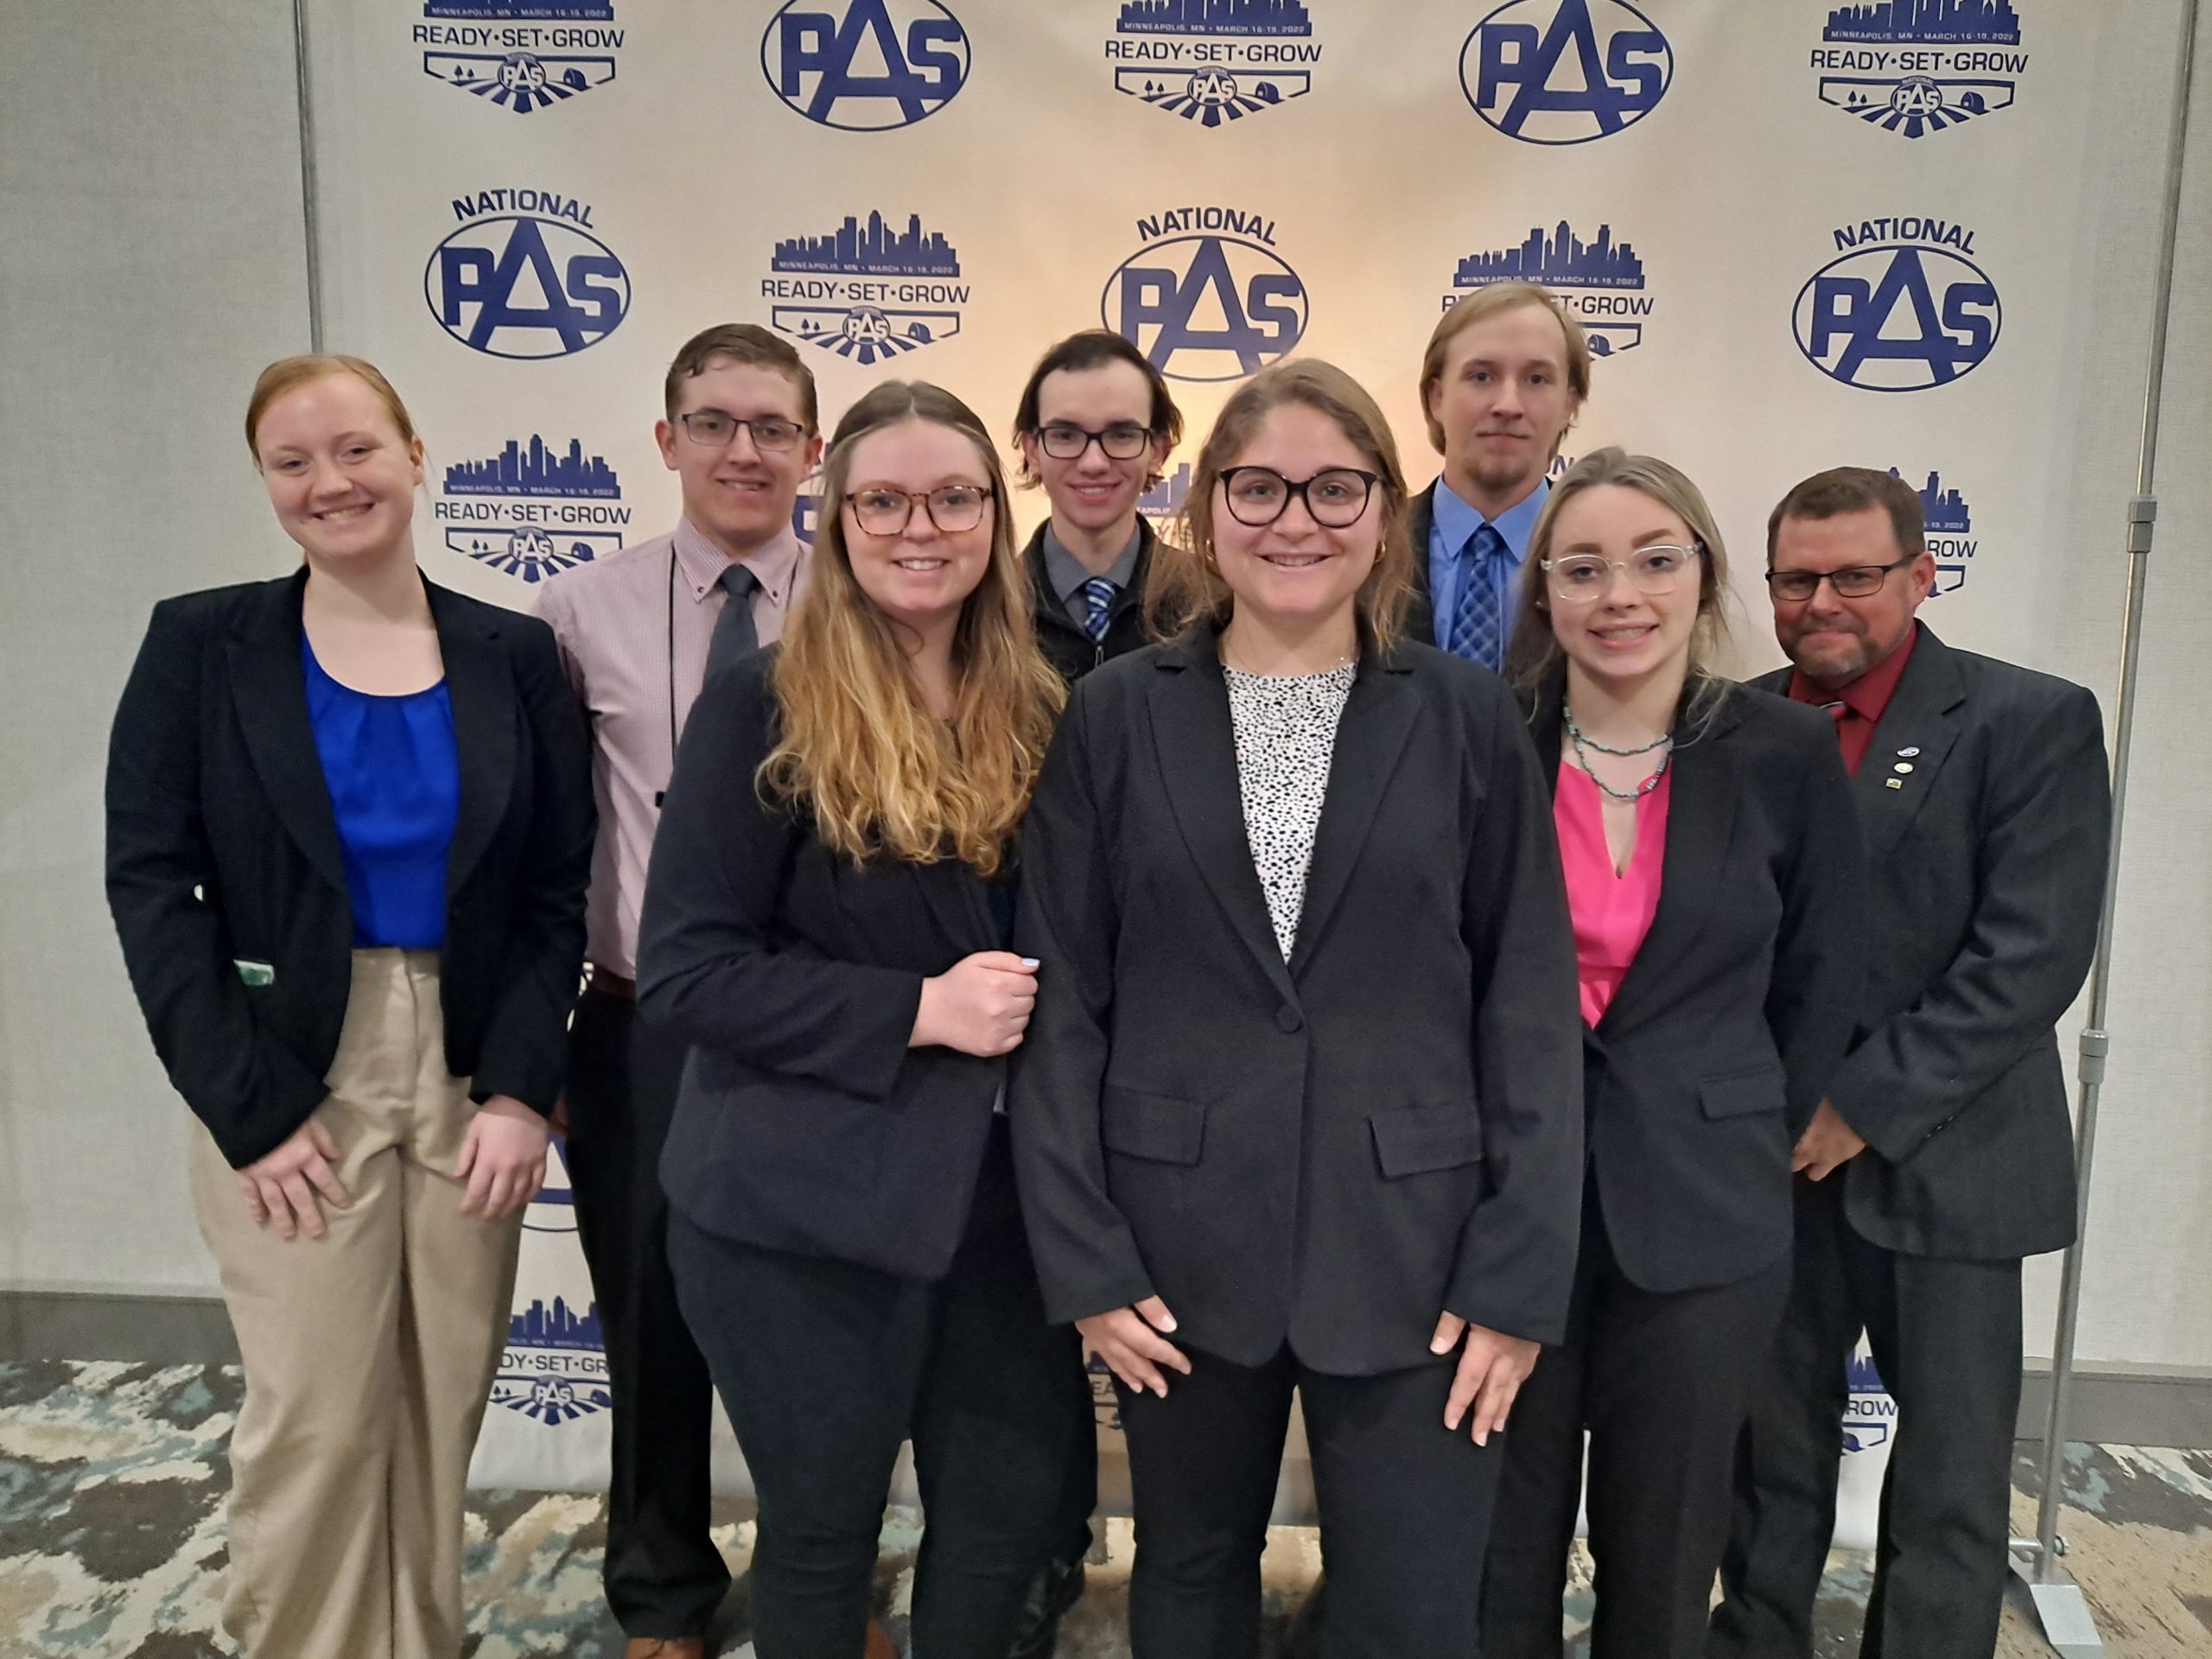 Read more about SFCC Ag students compete well at National PAS conference